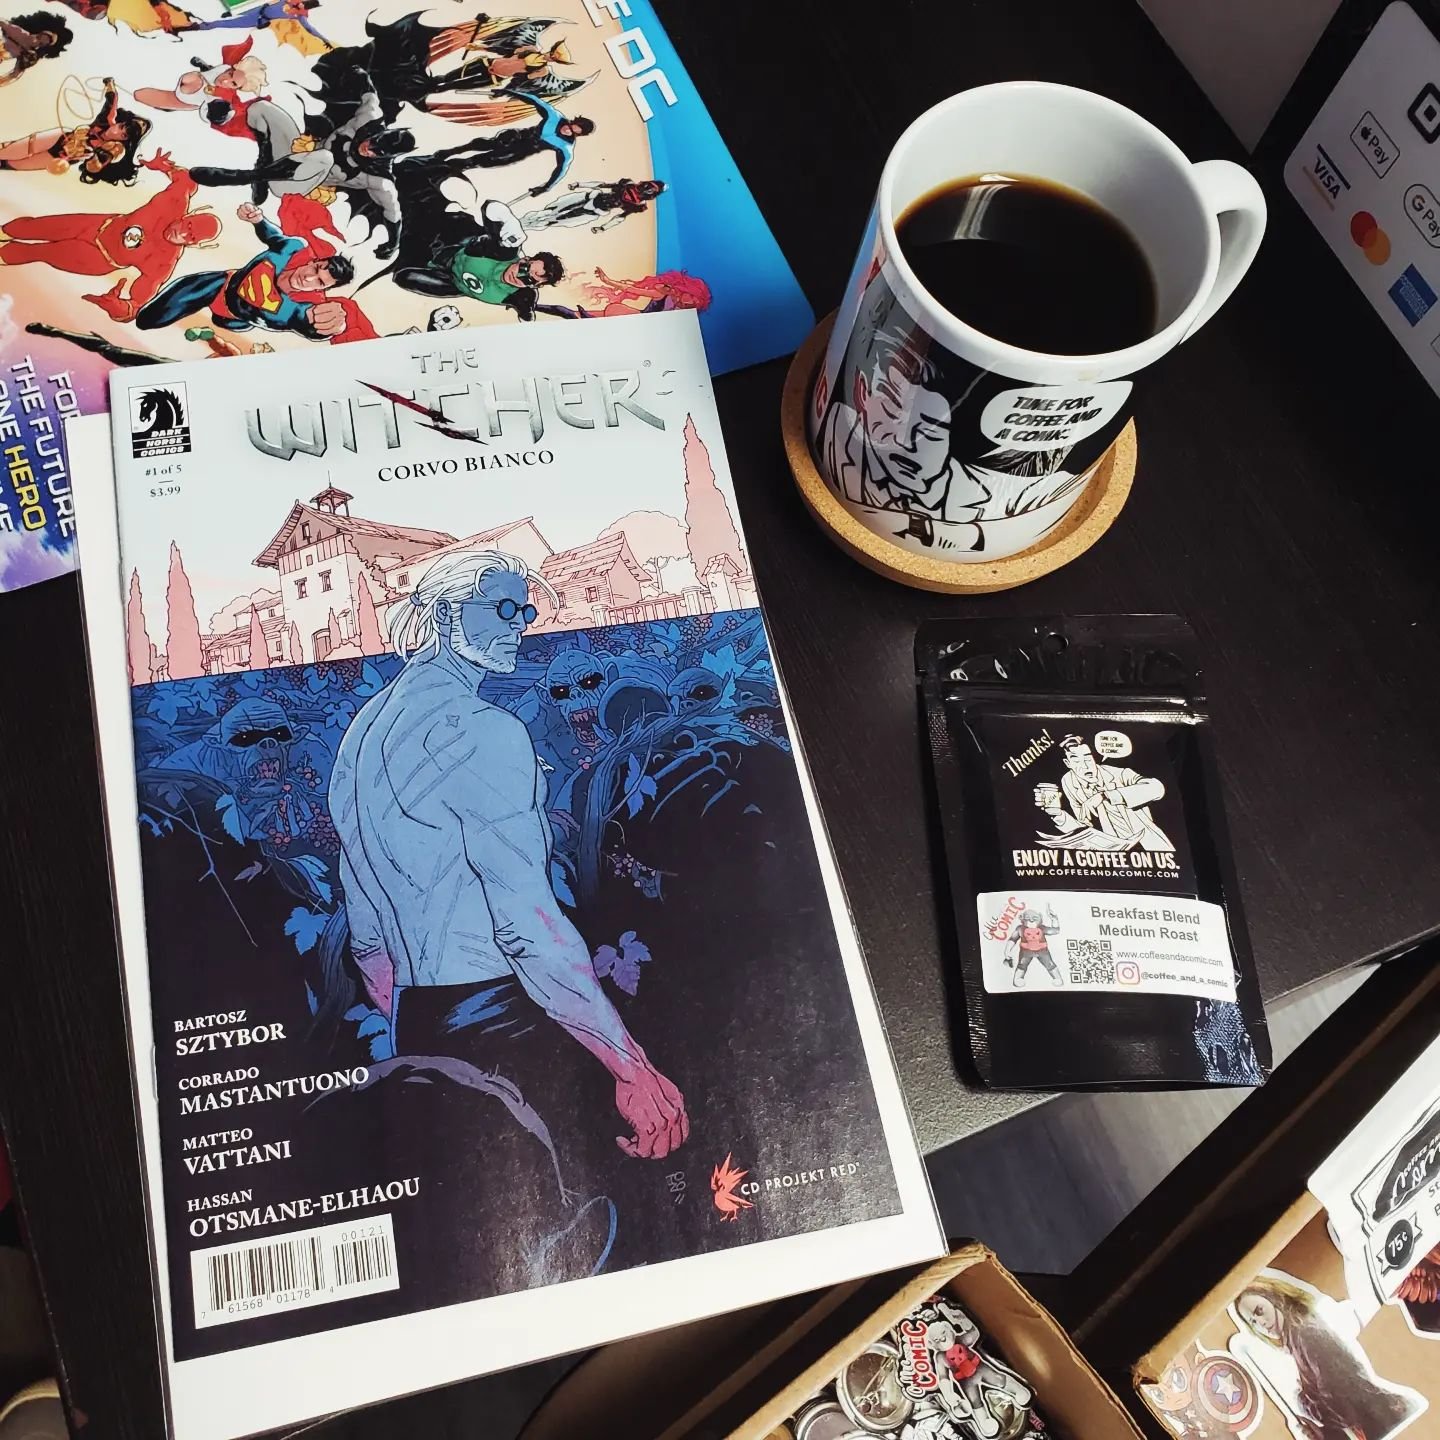 Today's coffee ☕ and a comic 📓 is WITCHER CORVO BIANCO 1, Geralt finds solace in the simple pleasures of life alongside Yennefer. Yet, the shadow of history looms large, drawing unwanted attention with every drop of blood and wine. Get ready for the